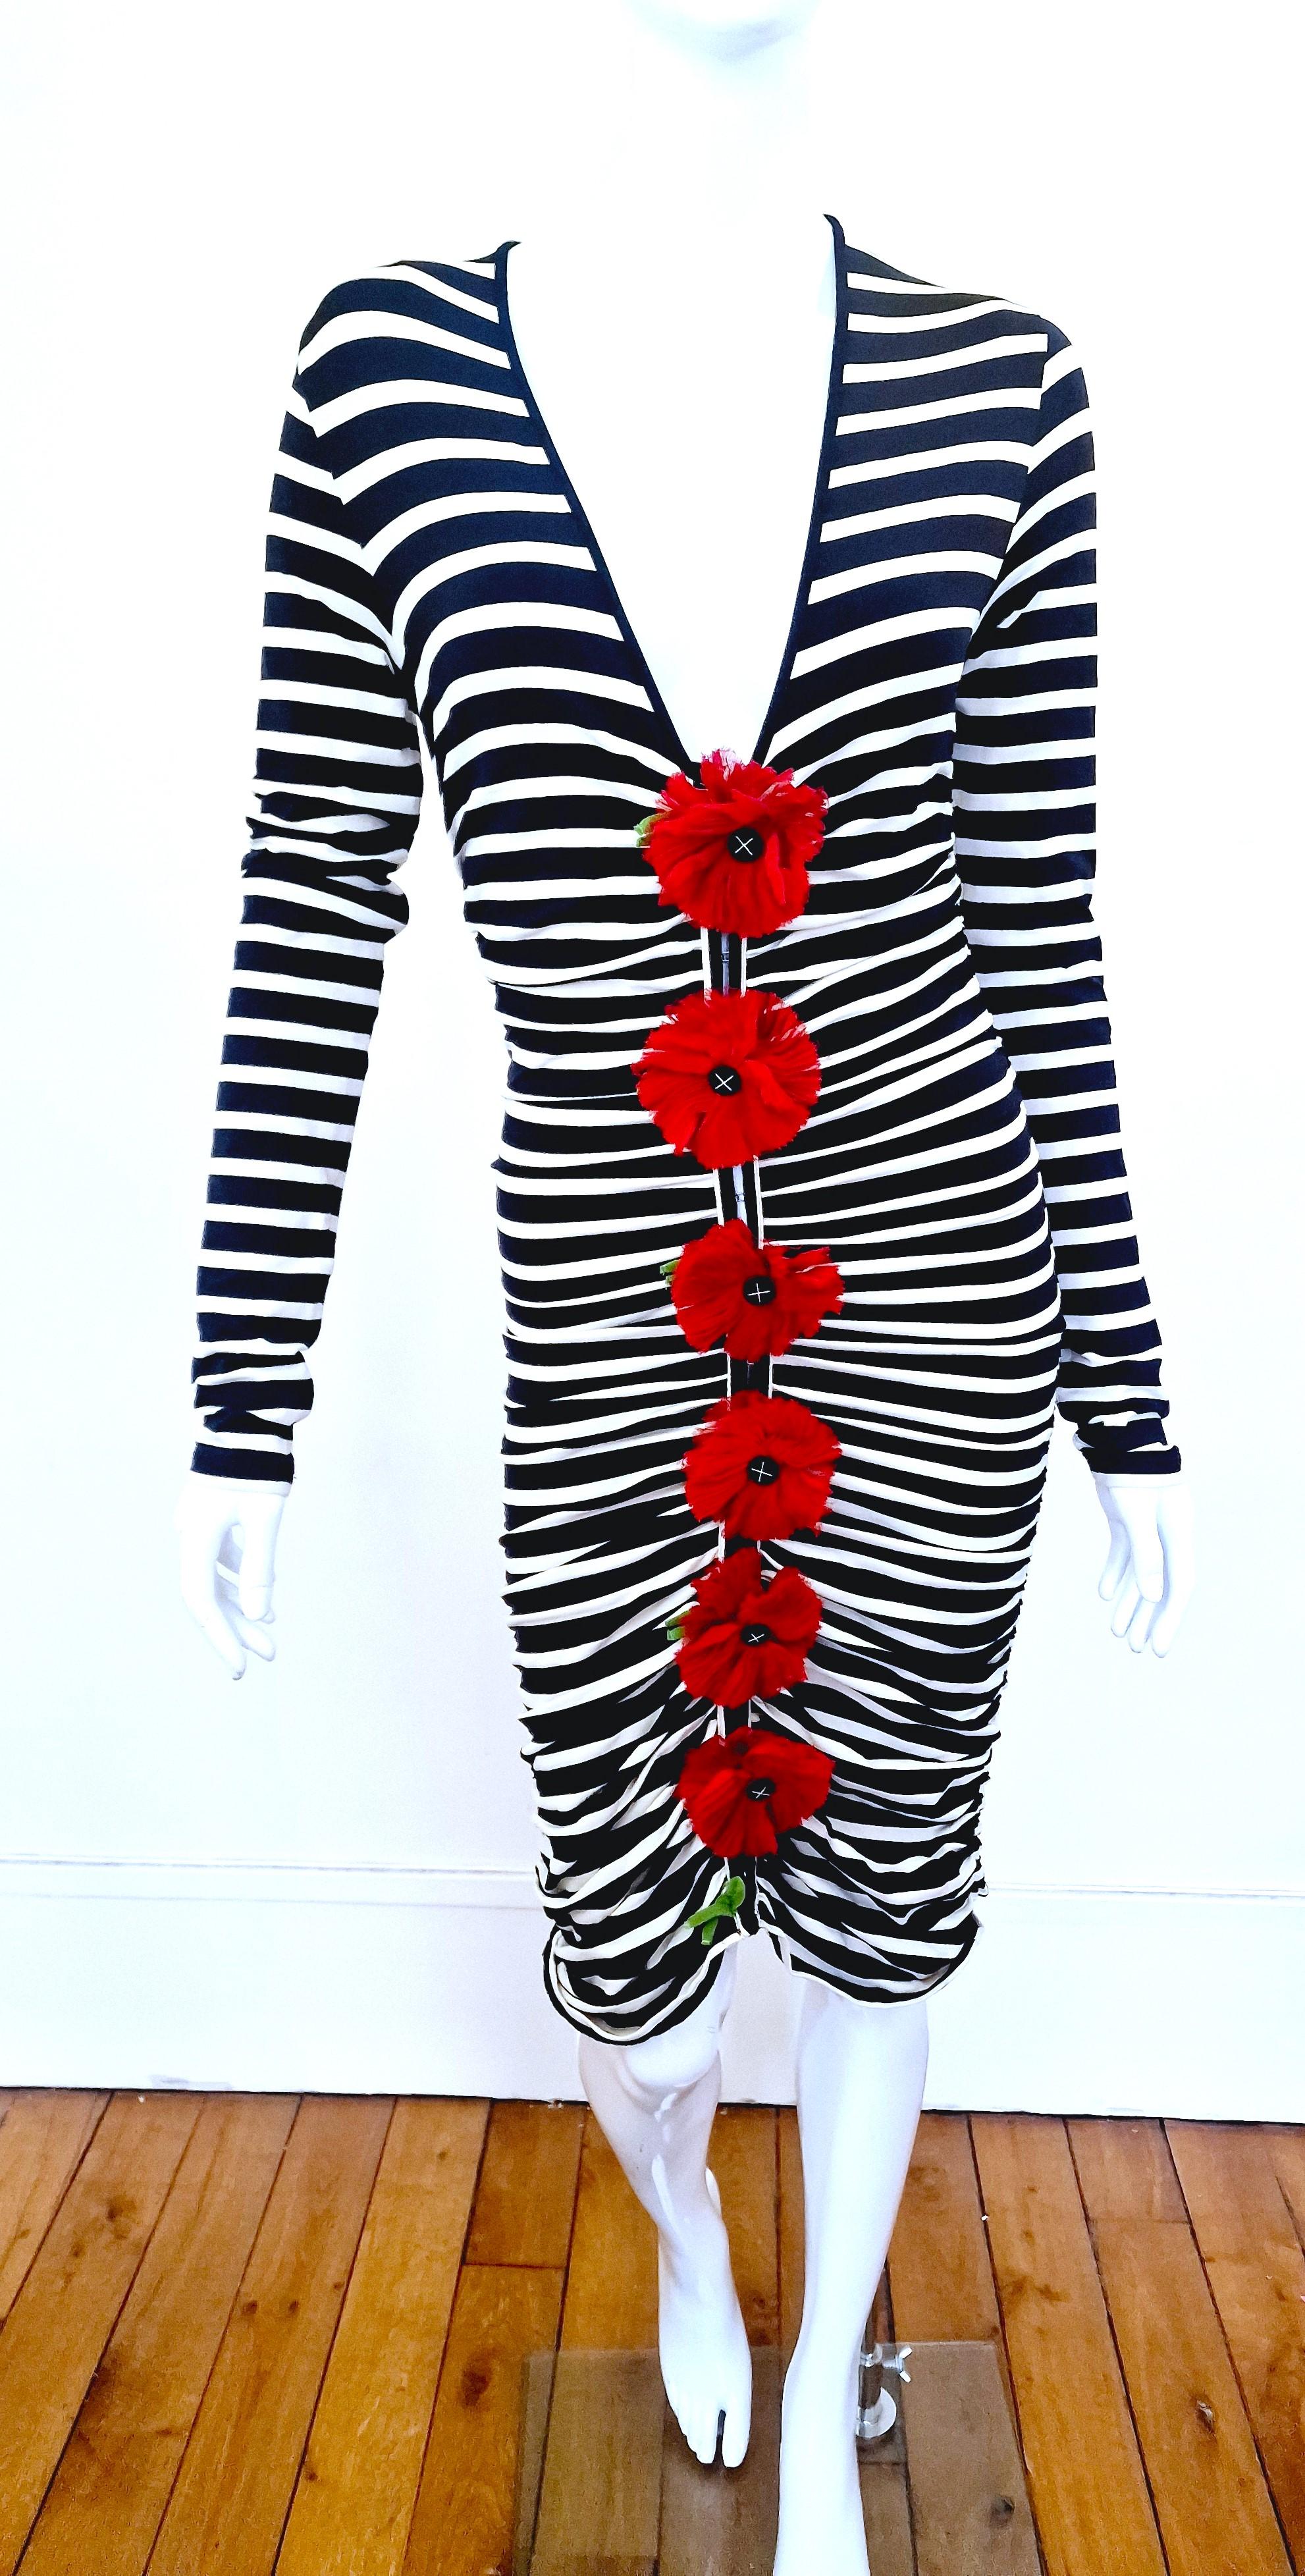 Beautiful sailor midi dress from Jean Paul Gaultier Soleil with s6 raw cutted 100% silk flowers applique on the front.
Closure: full clips on the front! 
Fabric is nicely stretch and fit beautifully the body as all the seams are ruched.

VERY GOOD